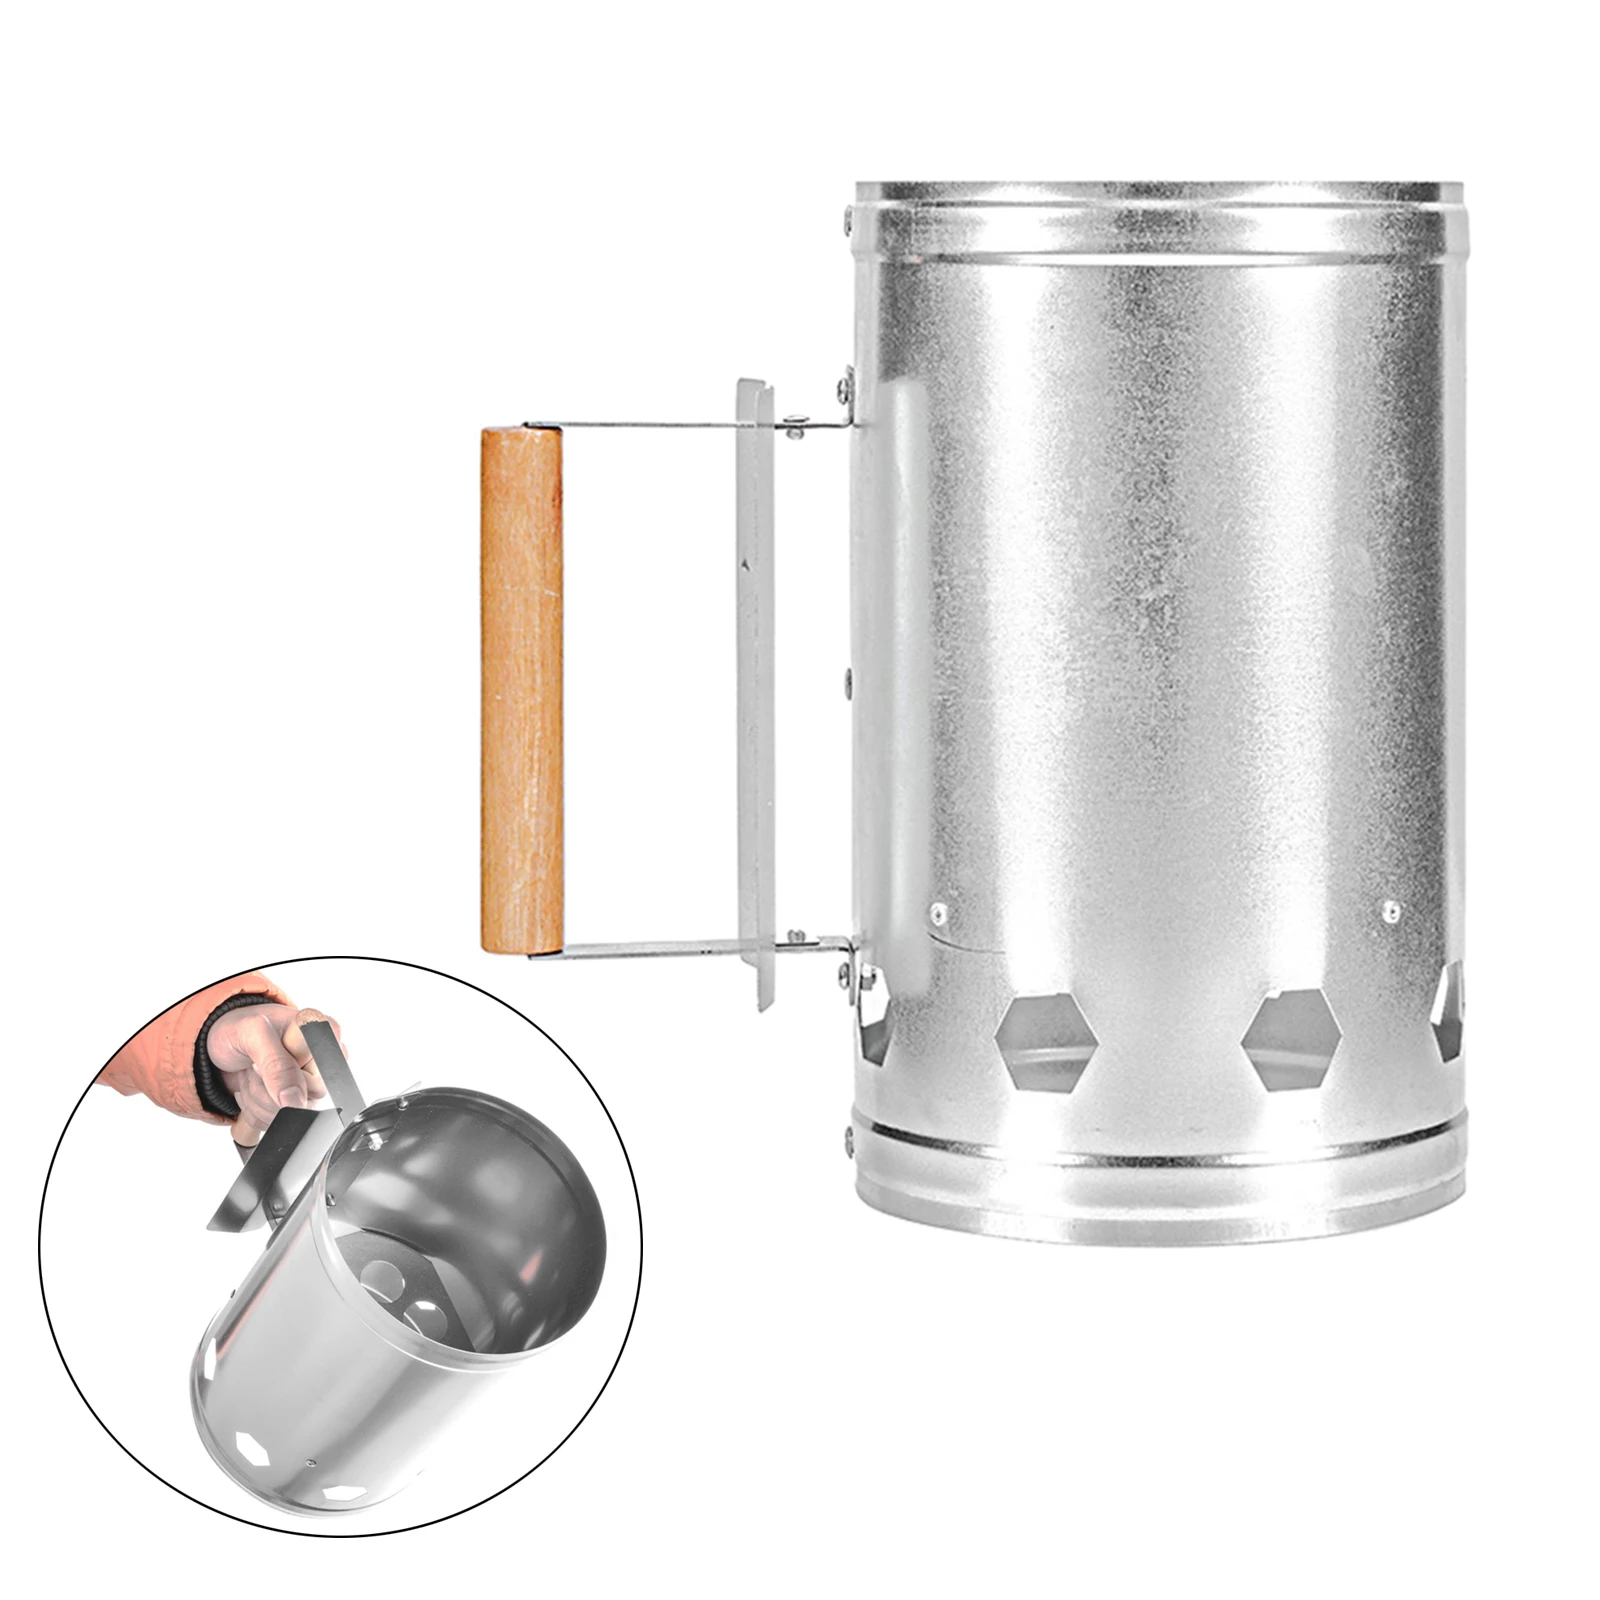 Barbecue Tools Fast Point Charcoal Ignition Barrels Carbon Stove Ignition Outdoor Barbecue Tools Bamboo Chimney Starter